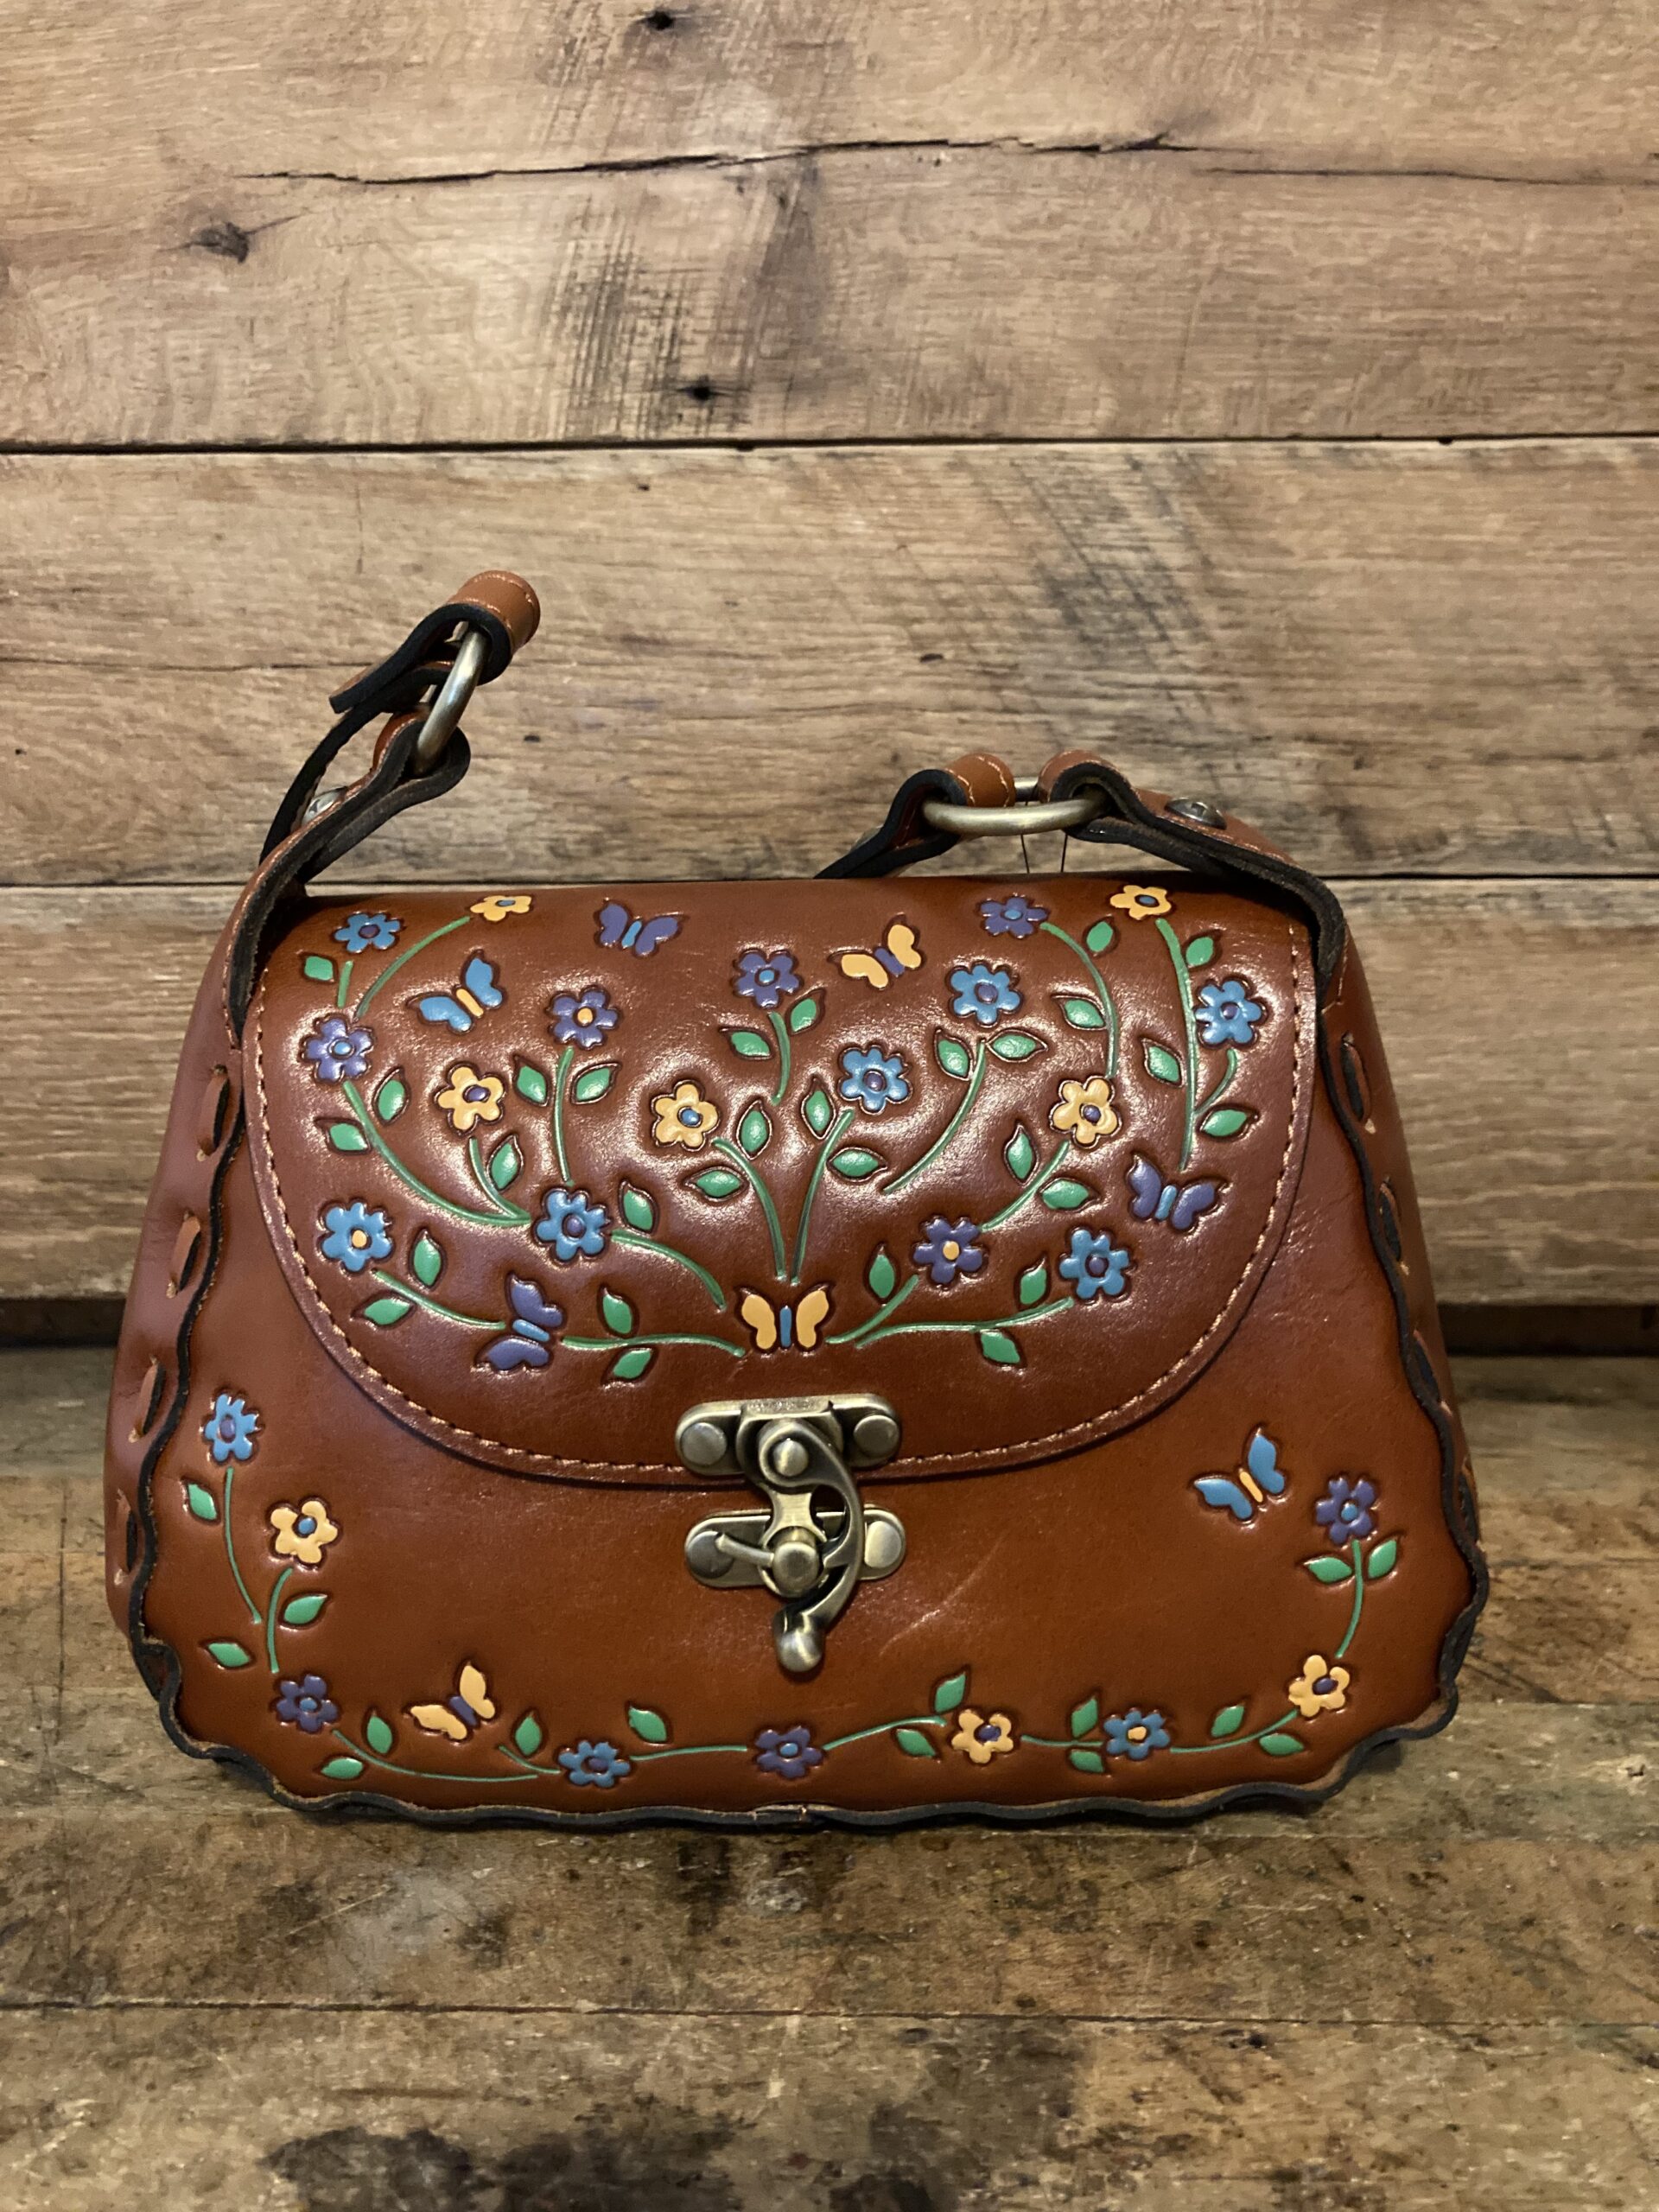 Patricia Nash Leather Micaela Baguette with Hand Painted Floral Tooled